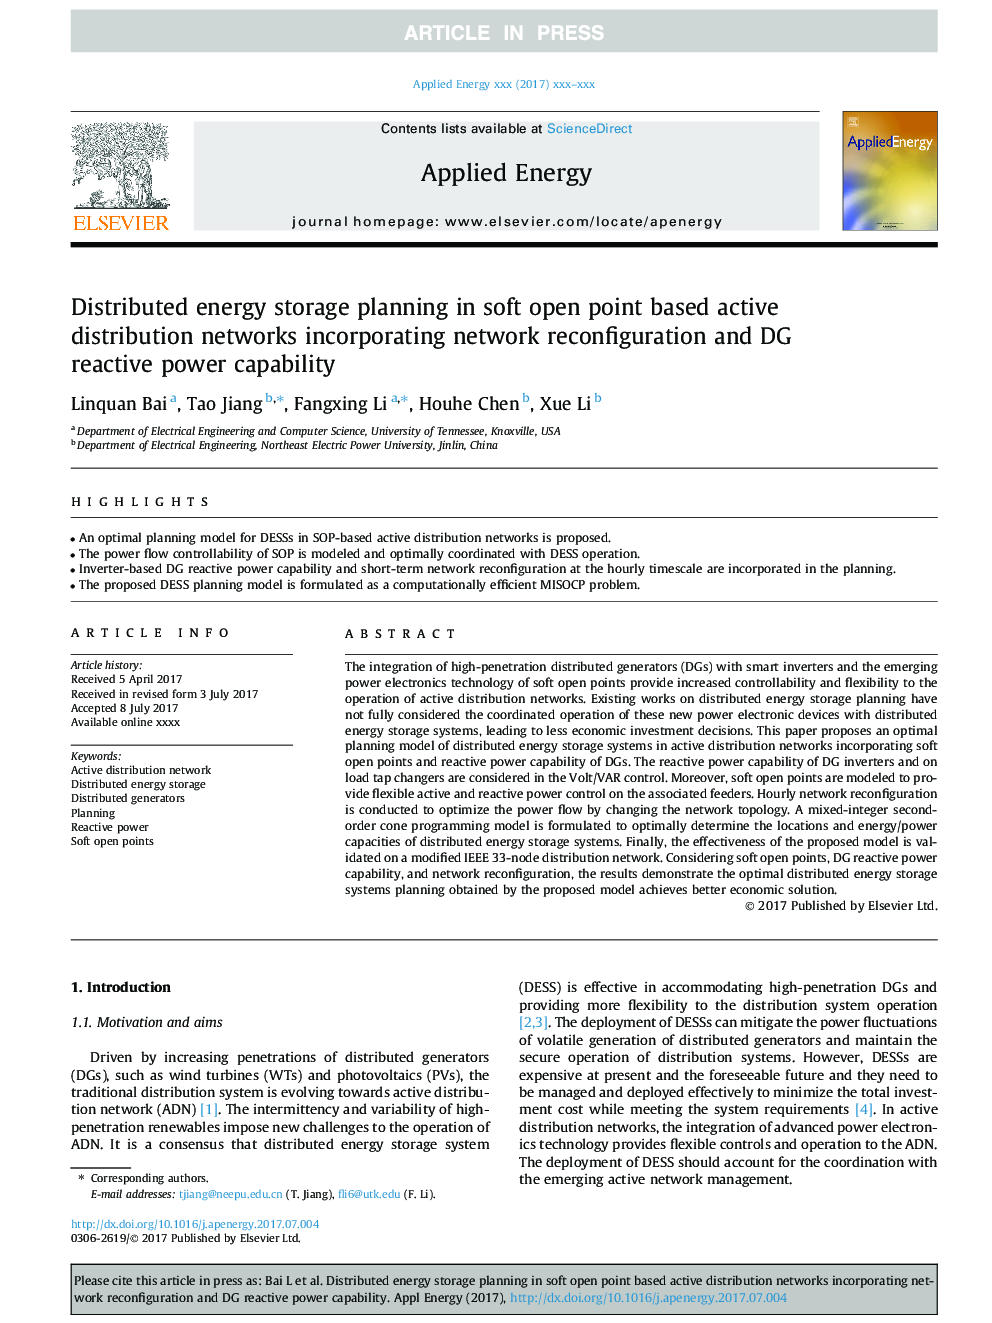 Distributed energy storage planning in soft open point based active distribution networks incorporating network reconfiguration and DG reactive power capability